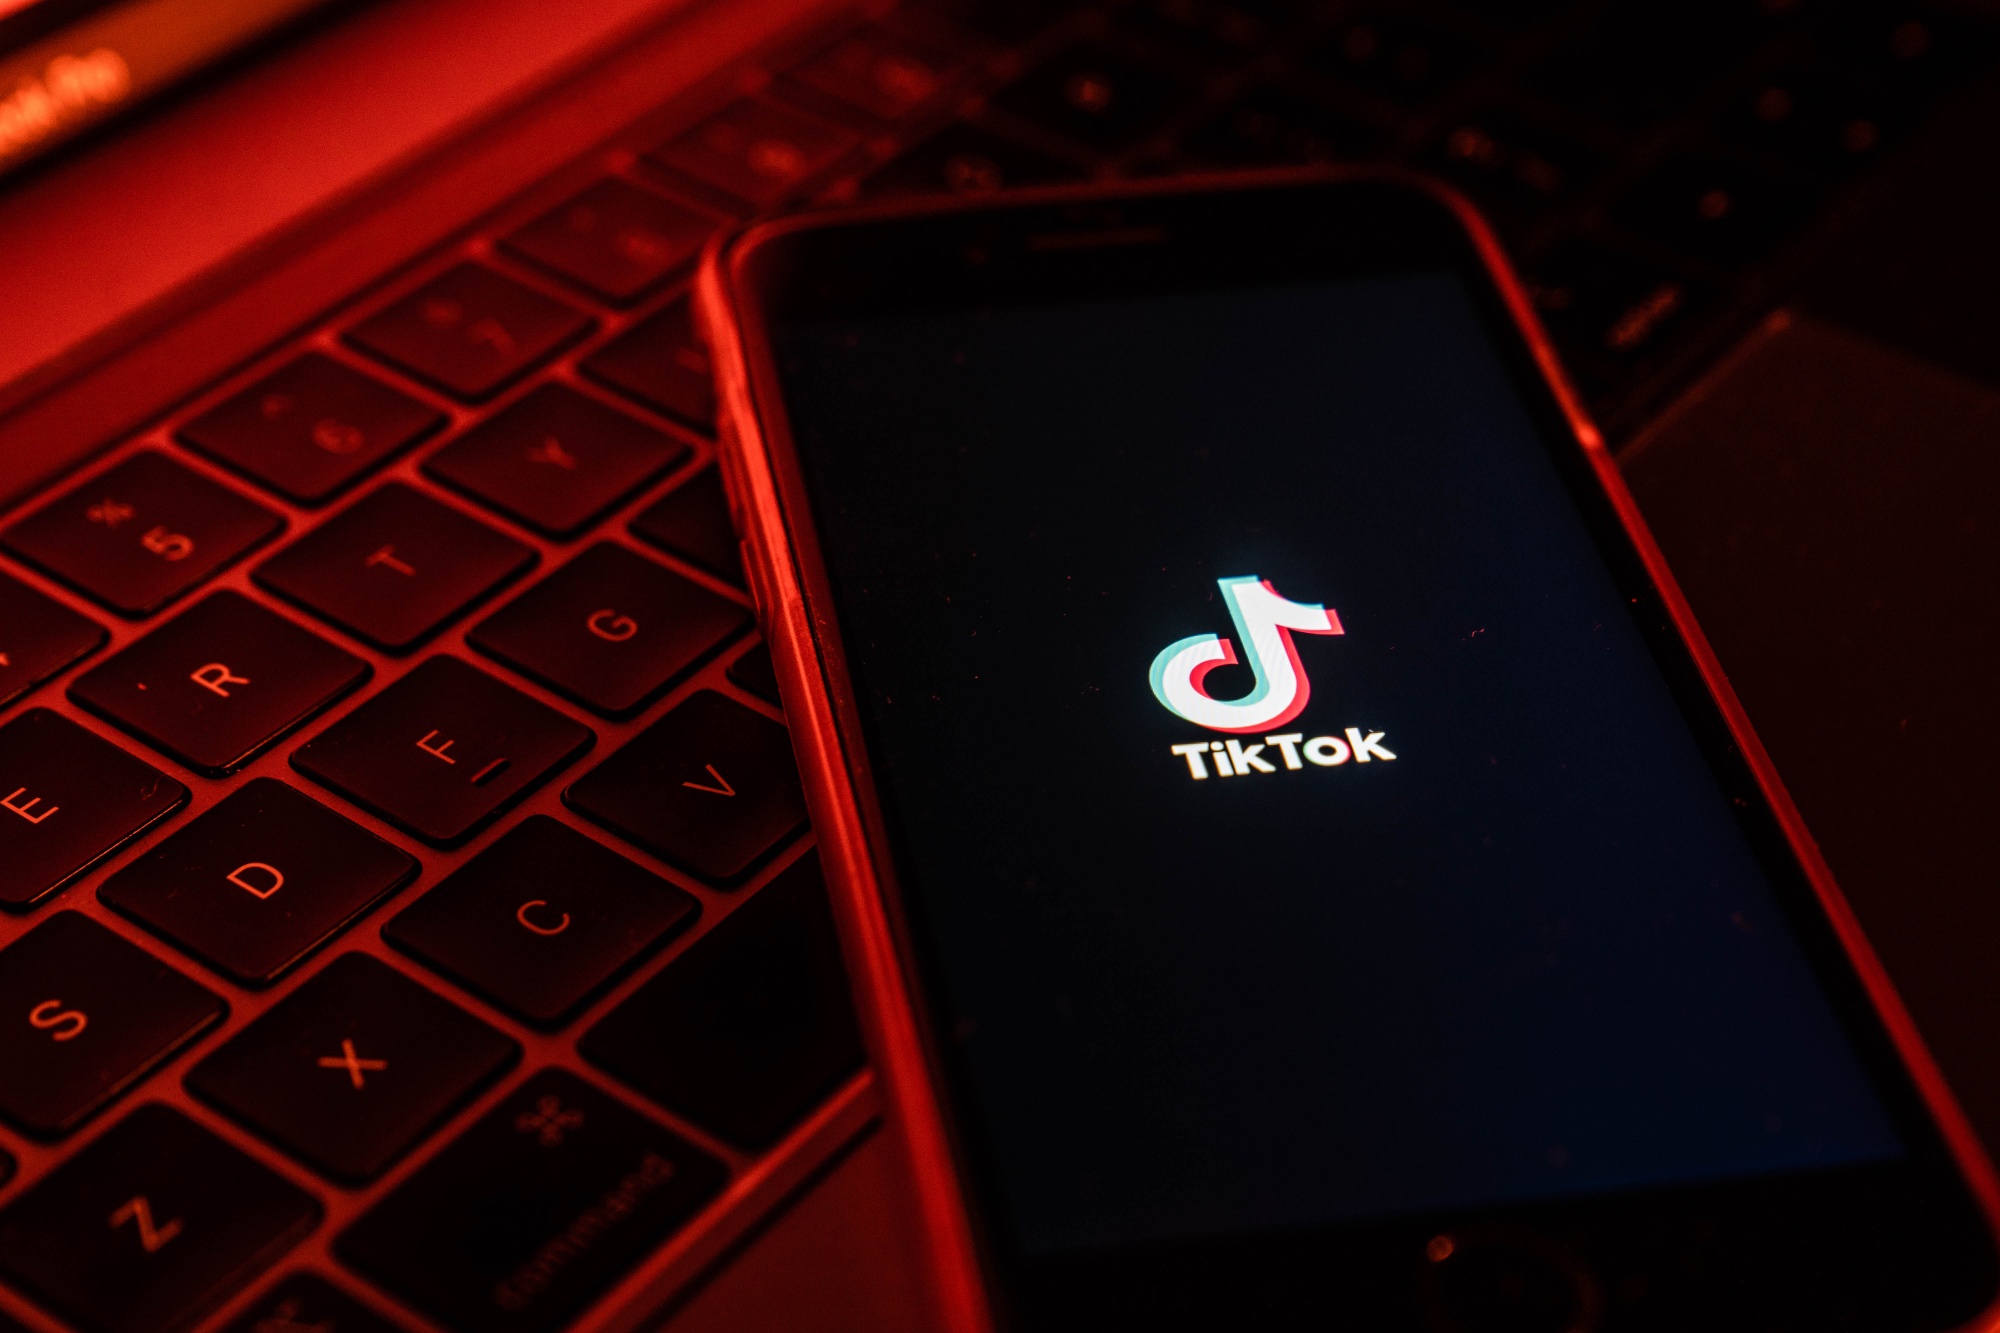 CIA Finds 'No Evidence' Chinese Government Has Accessed TikTok